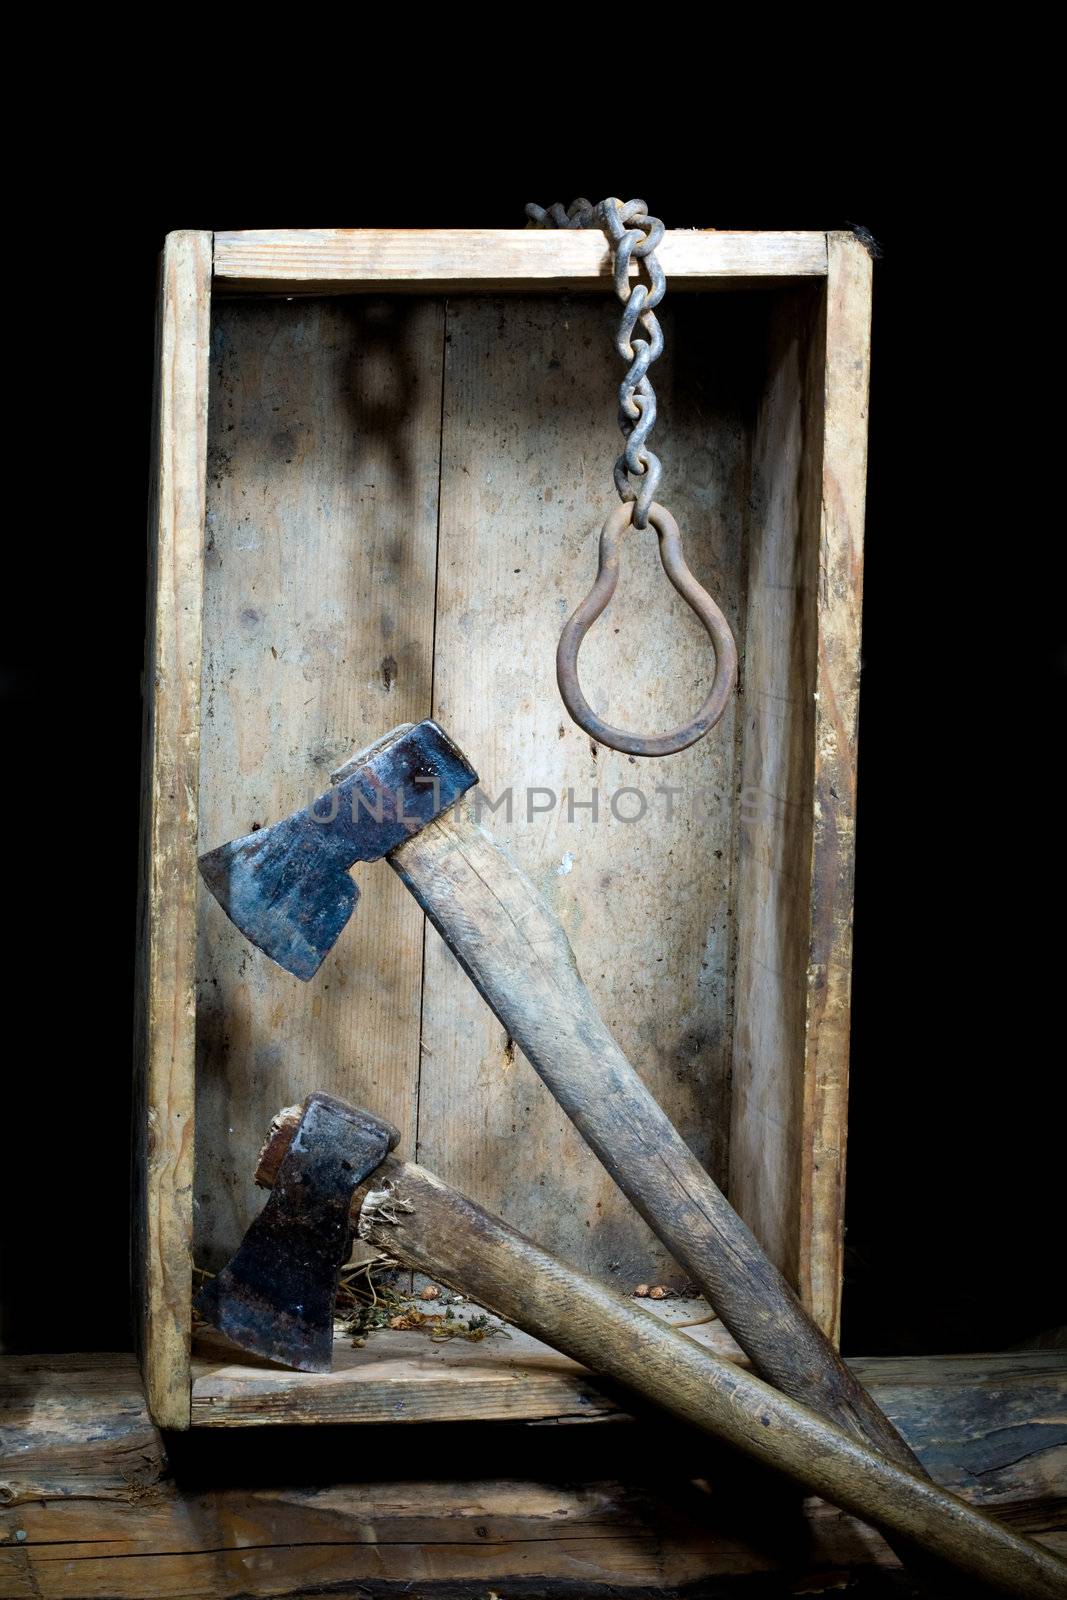 Stock photo: an image of two axes and metal chain  in a wooden box